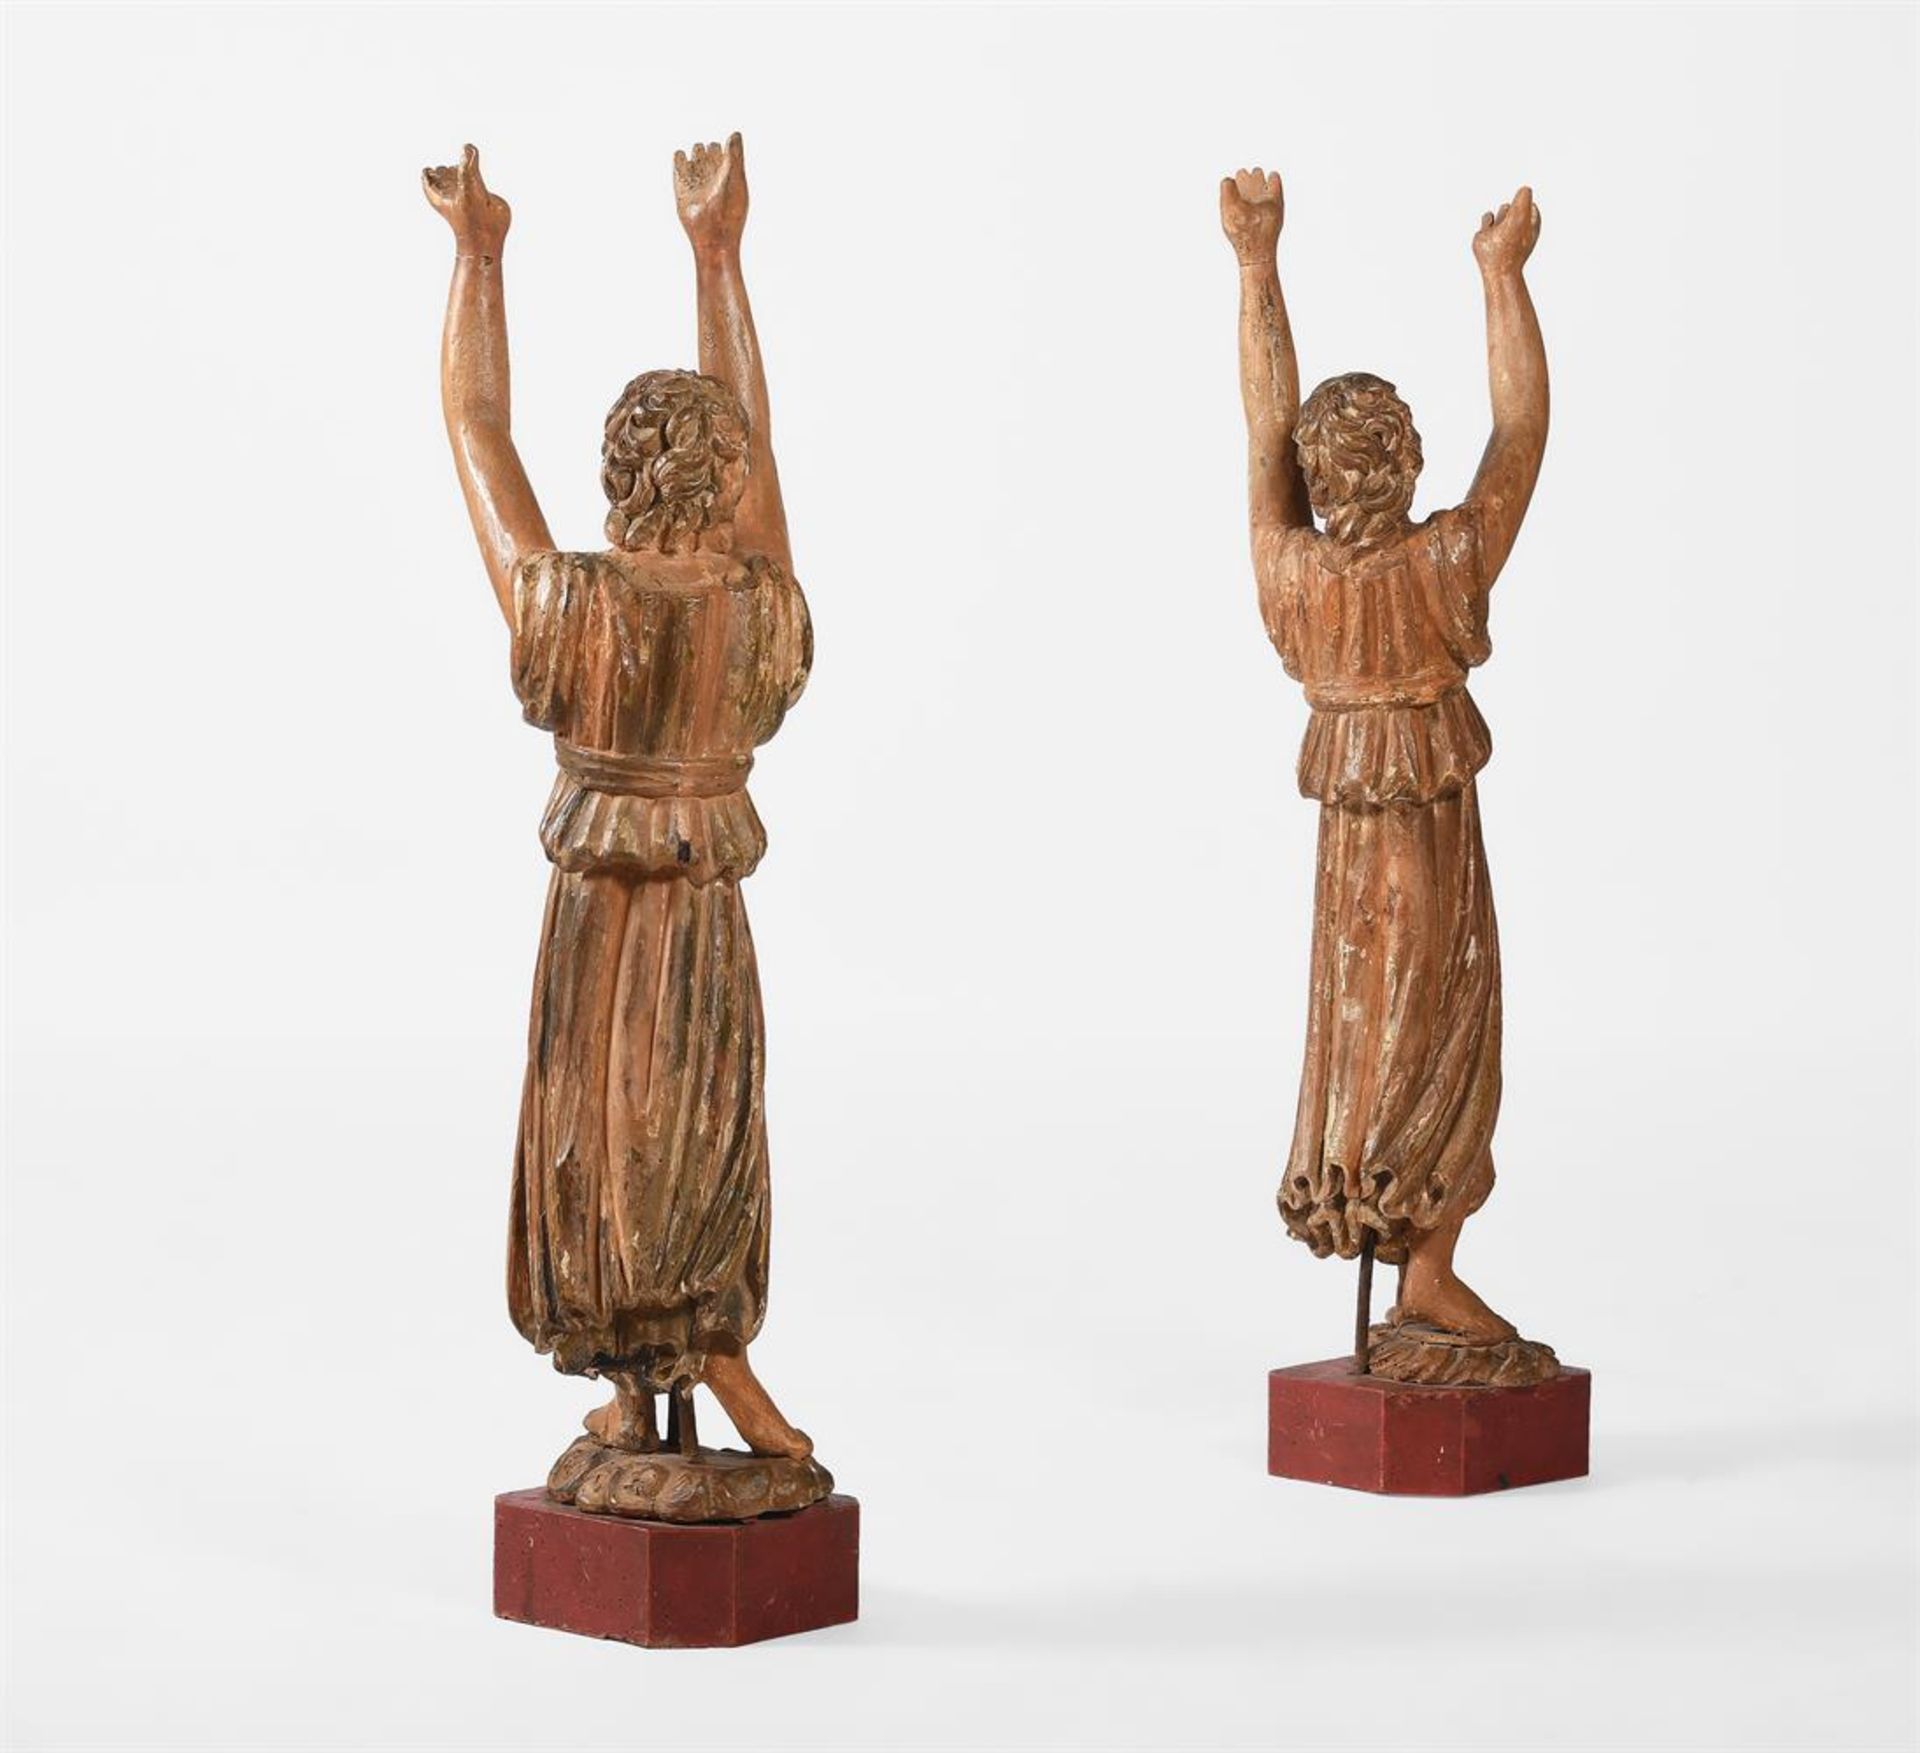 A PAIR OF CARVED POLYCHROME PAINTED FIGURES, LATE 17TH OR EARLY 18TH CENTURY - Image 4 of 4